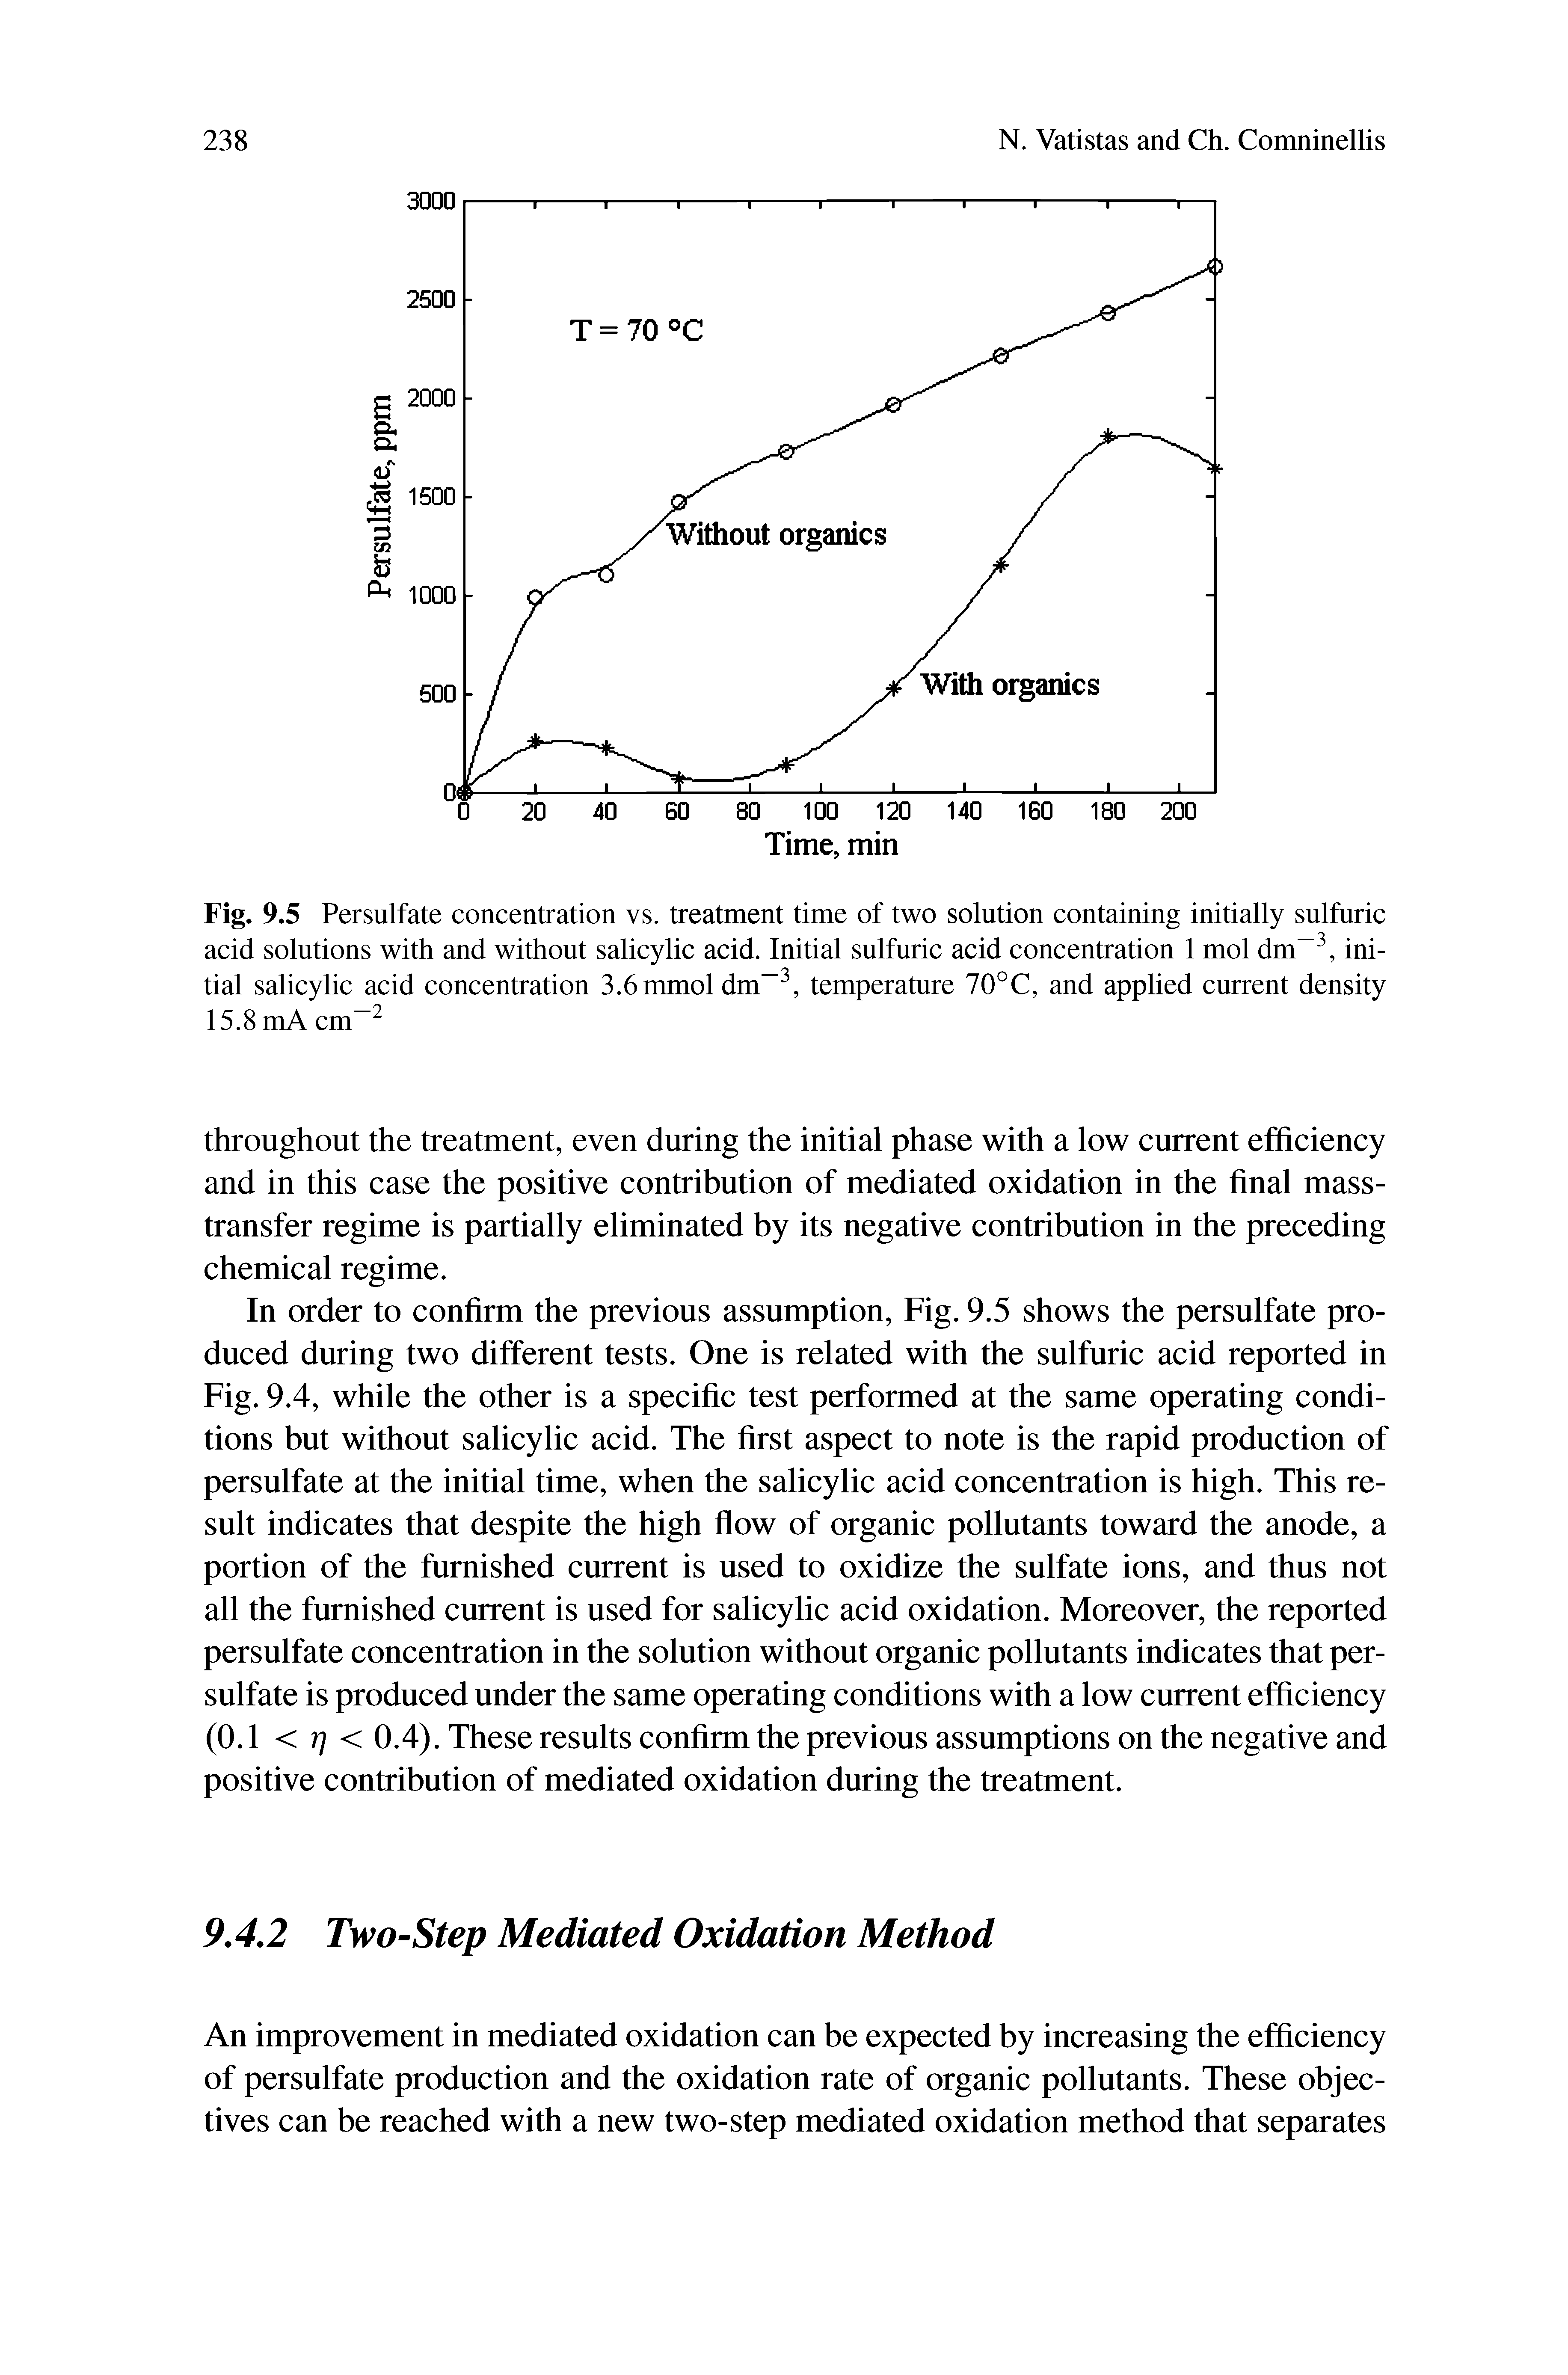 Fig. 9.5 Persulfate concentration vs. treatment time of two solution containing initially sulfuric acid solutions with and without salicylic acid. Initial sulfuric acid concentration 1 mol dm-3, initial salicylic acid concentration 3.6mmol dm-3, temperature 70°C, and applied current density 15.8 mA cm-2...